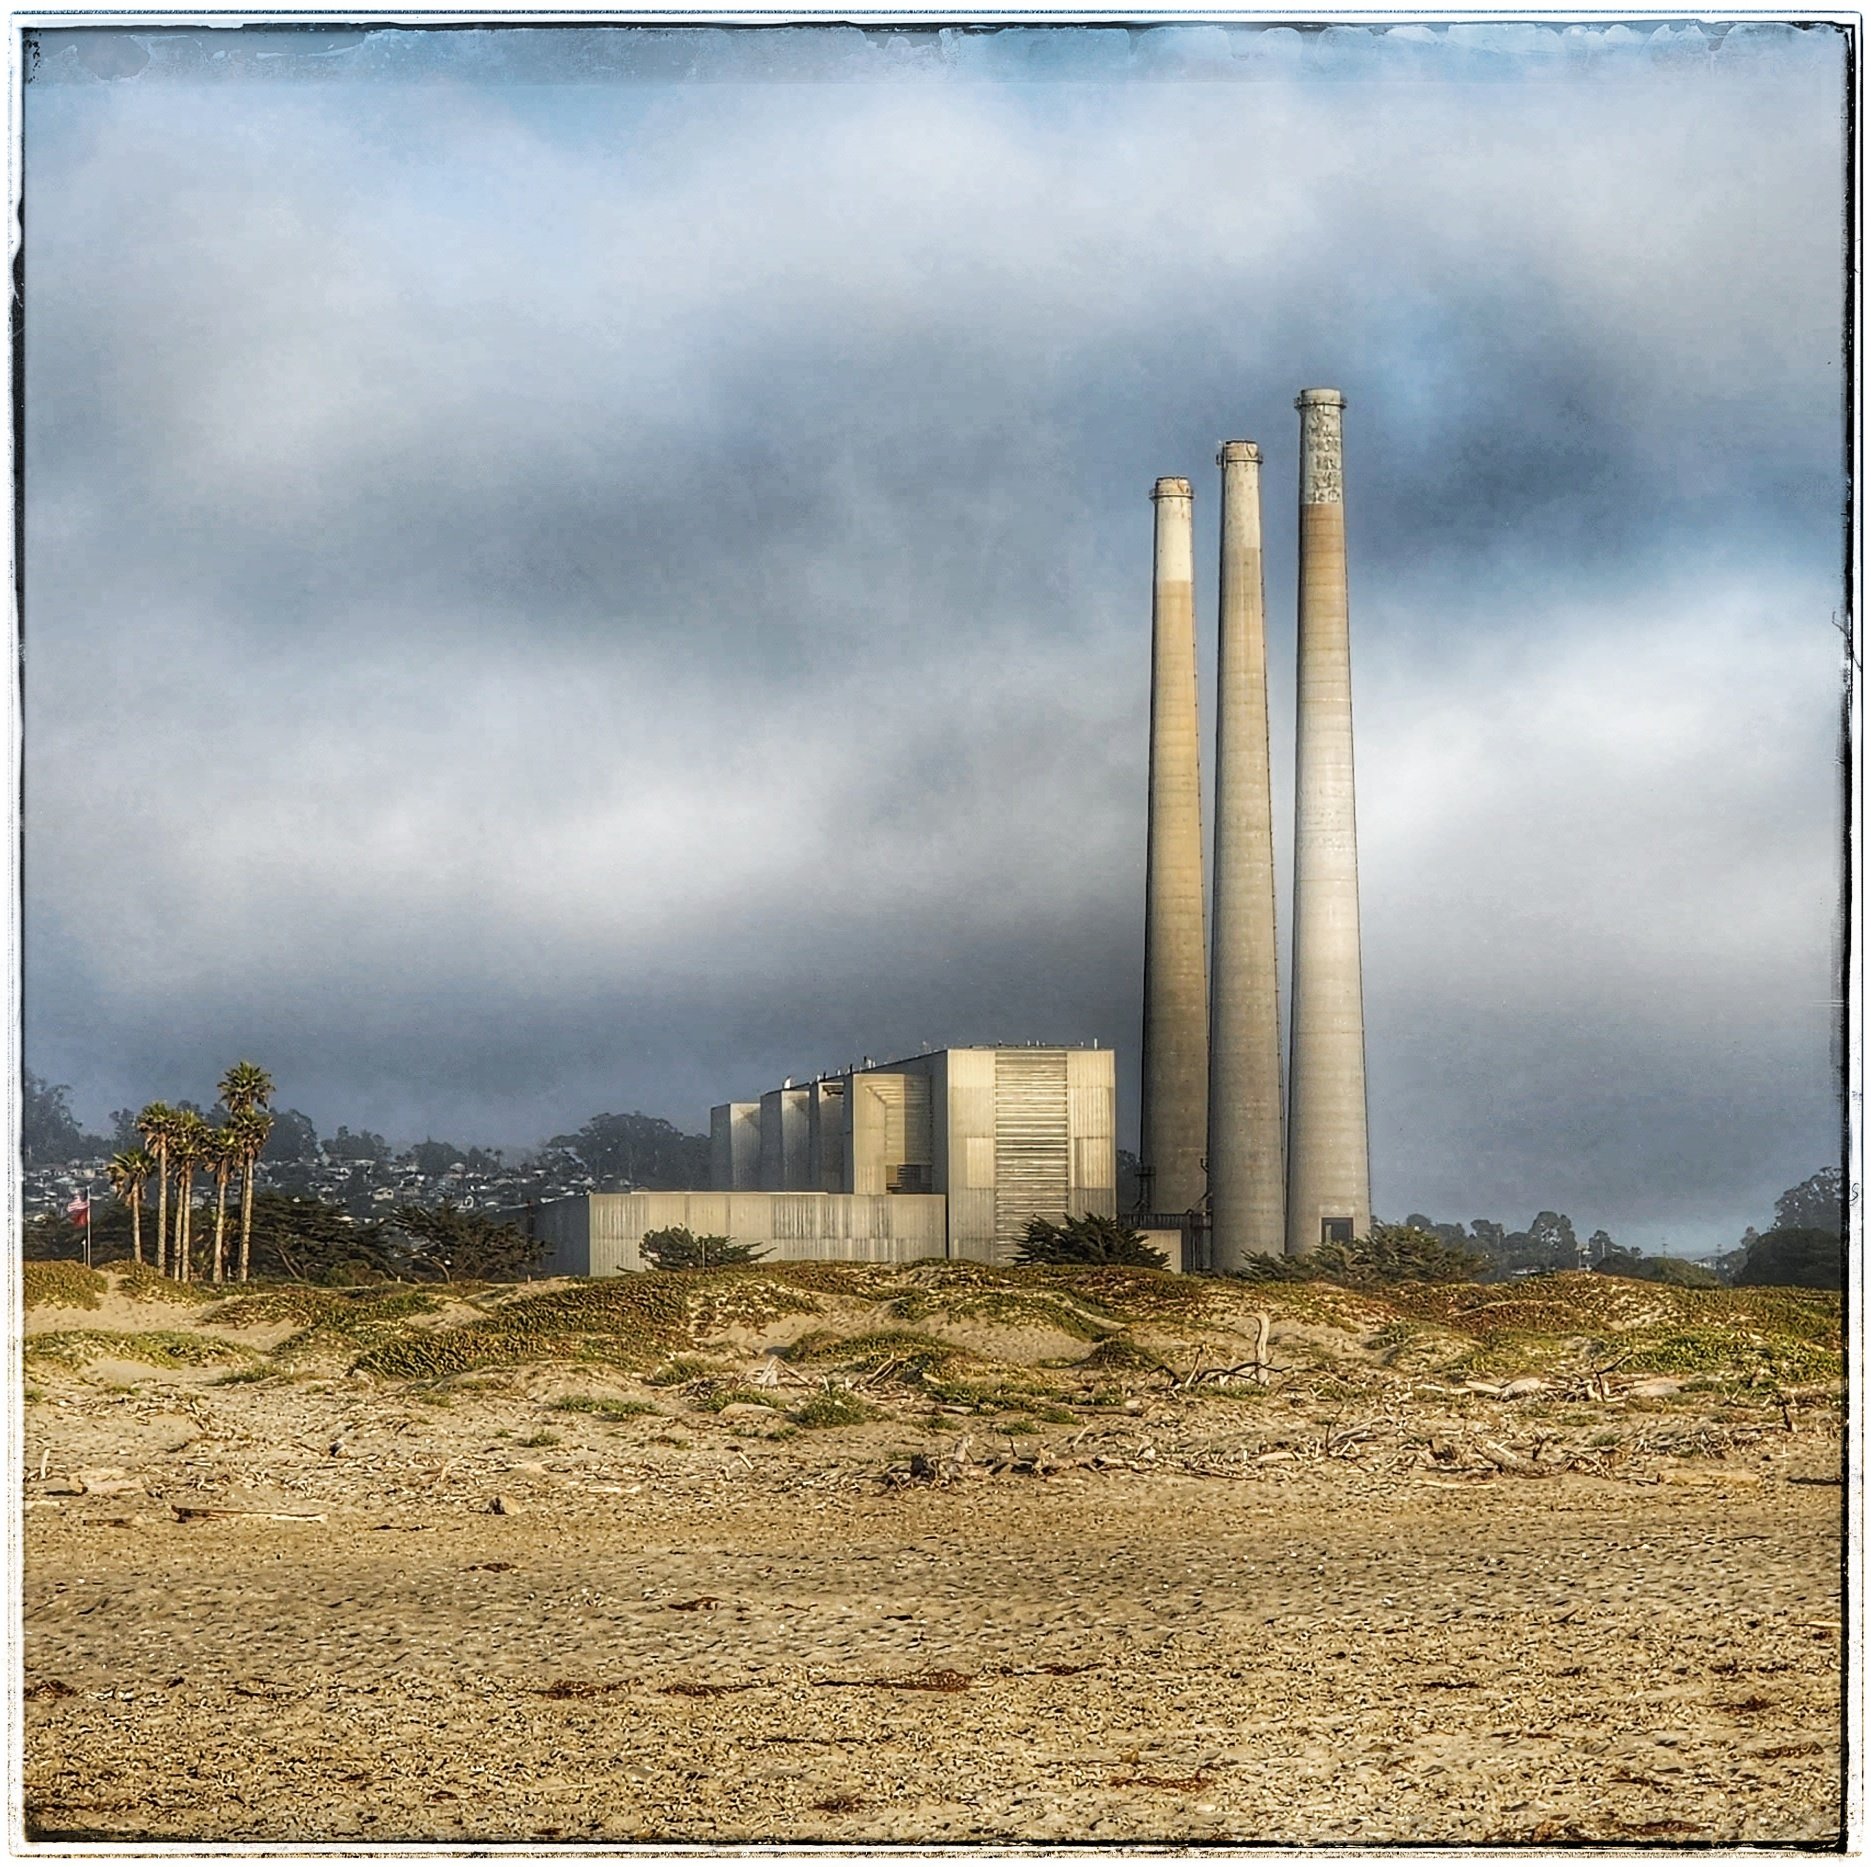  A view of the old PG&amp;E power plant with smokestacks looking east from Morro Strand State Beach at Morro Bay, California. 